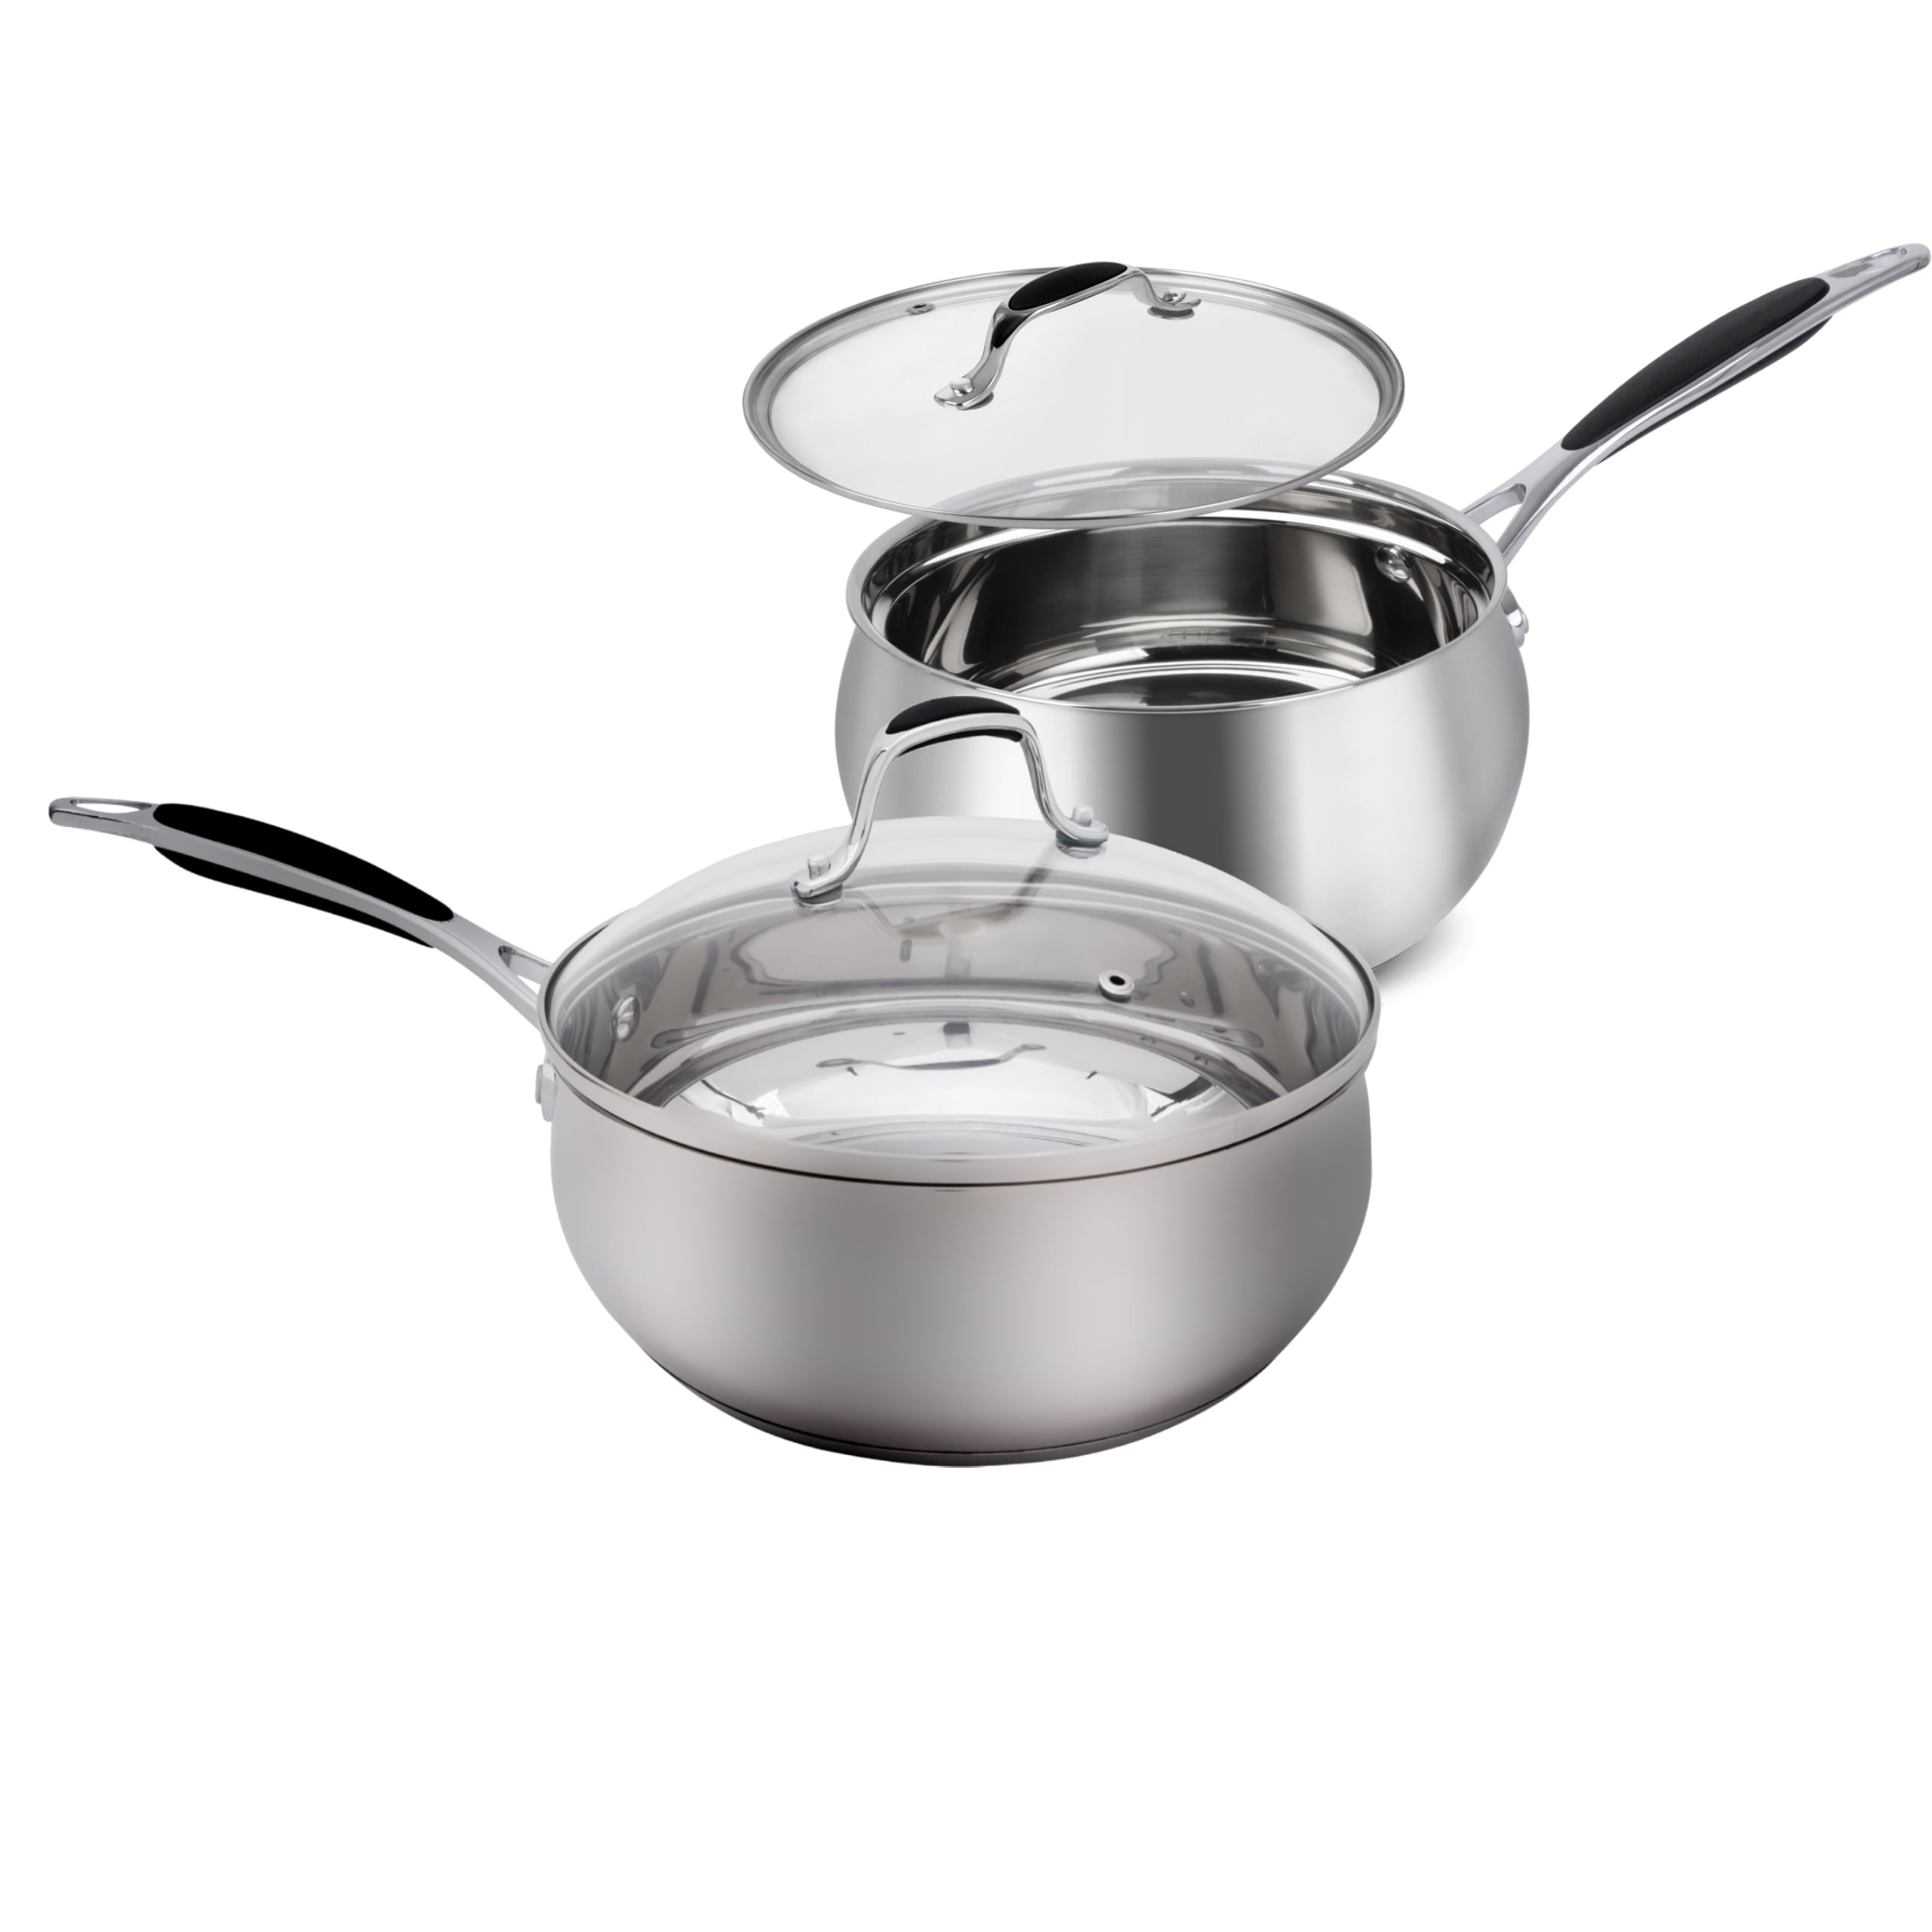 Stainless Cooking SET 3quart sauce pan Fry Essentials 6 Quart Stock Pot With Lid 